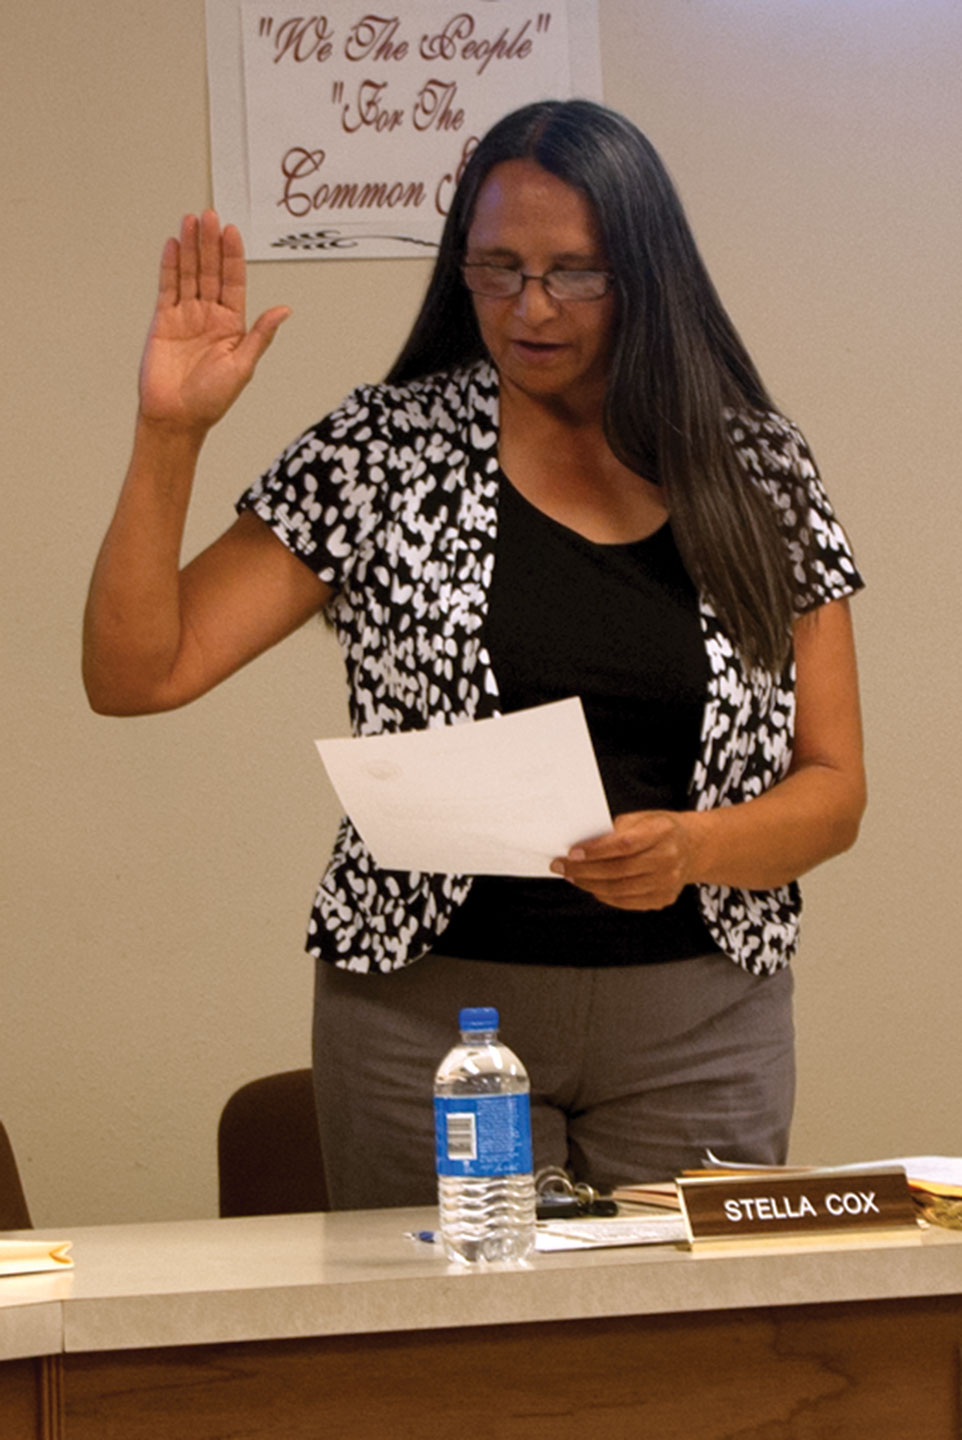 Southern Ute Indian Tribe employee Stella Cox took an oath of office on Tuesday, June 11 to serve as mayor of the Town of Ignacio. Cox, a clerk with the Tribal Court, had served previously as mayor pro-tem. She won the job in a special election and replaces Ena Millich, who resigned in February, and will serve until April 1, 2014.